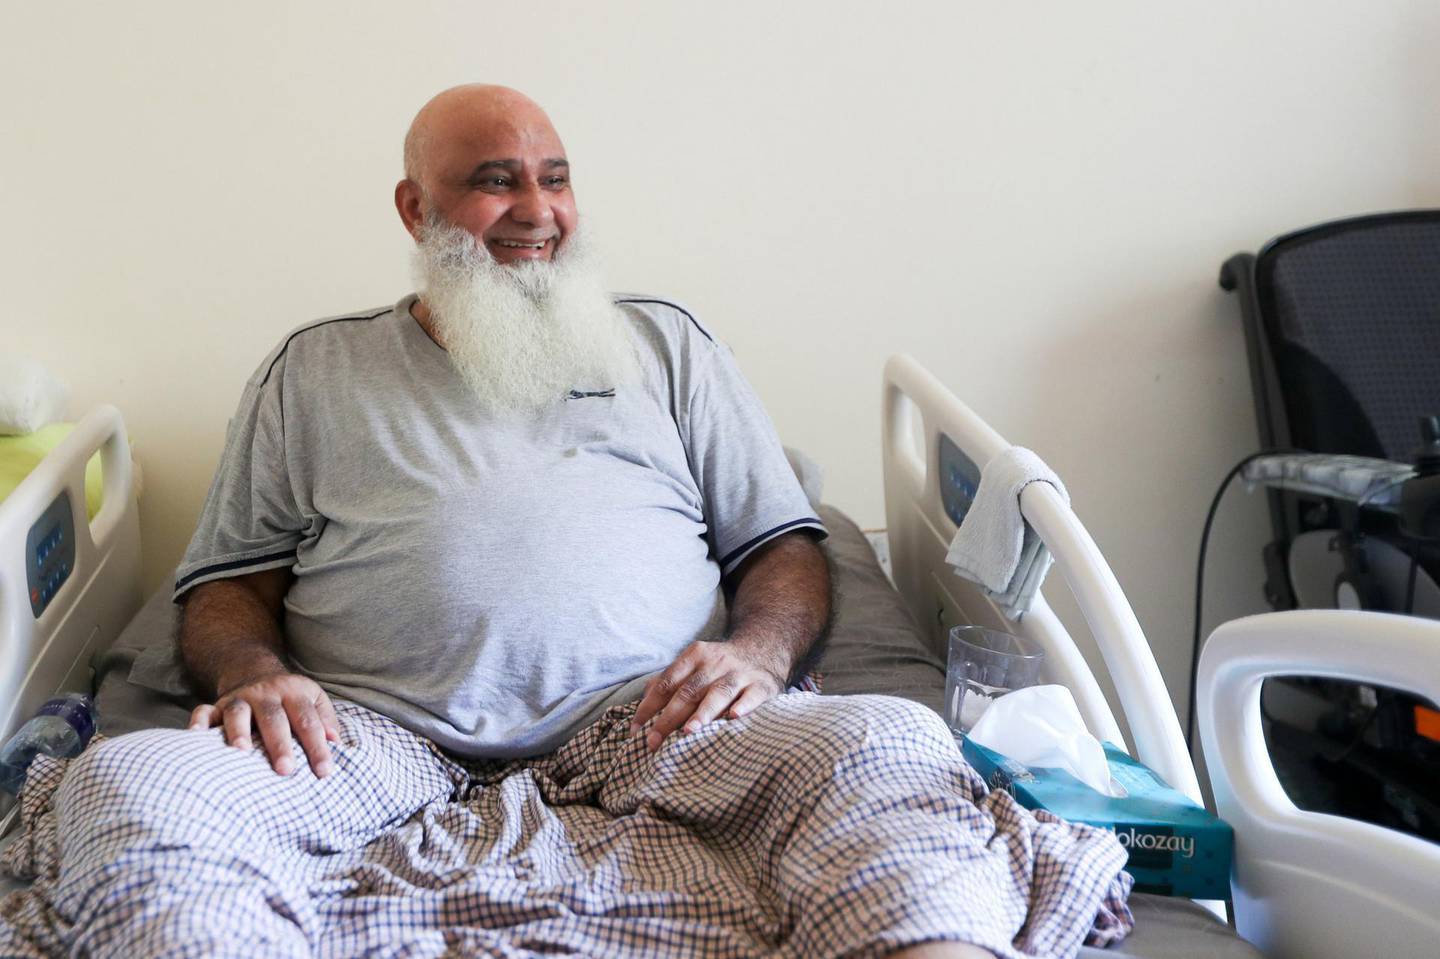 Abu Dhabi, United Arab Emirates. June 17, 2019. Portraits of the retired cricket player, Mohammad Ishaq, in his home. He has been in a wheelchair since 2009, forcing him to retire from the sport. Emily Broad for The National FOR: For Sports Reporter: Paul Radley